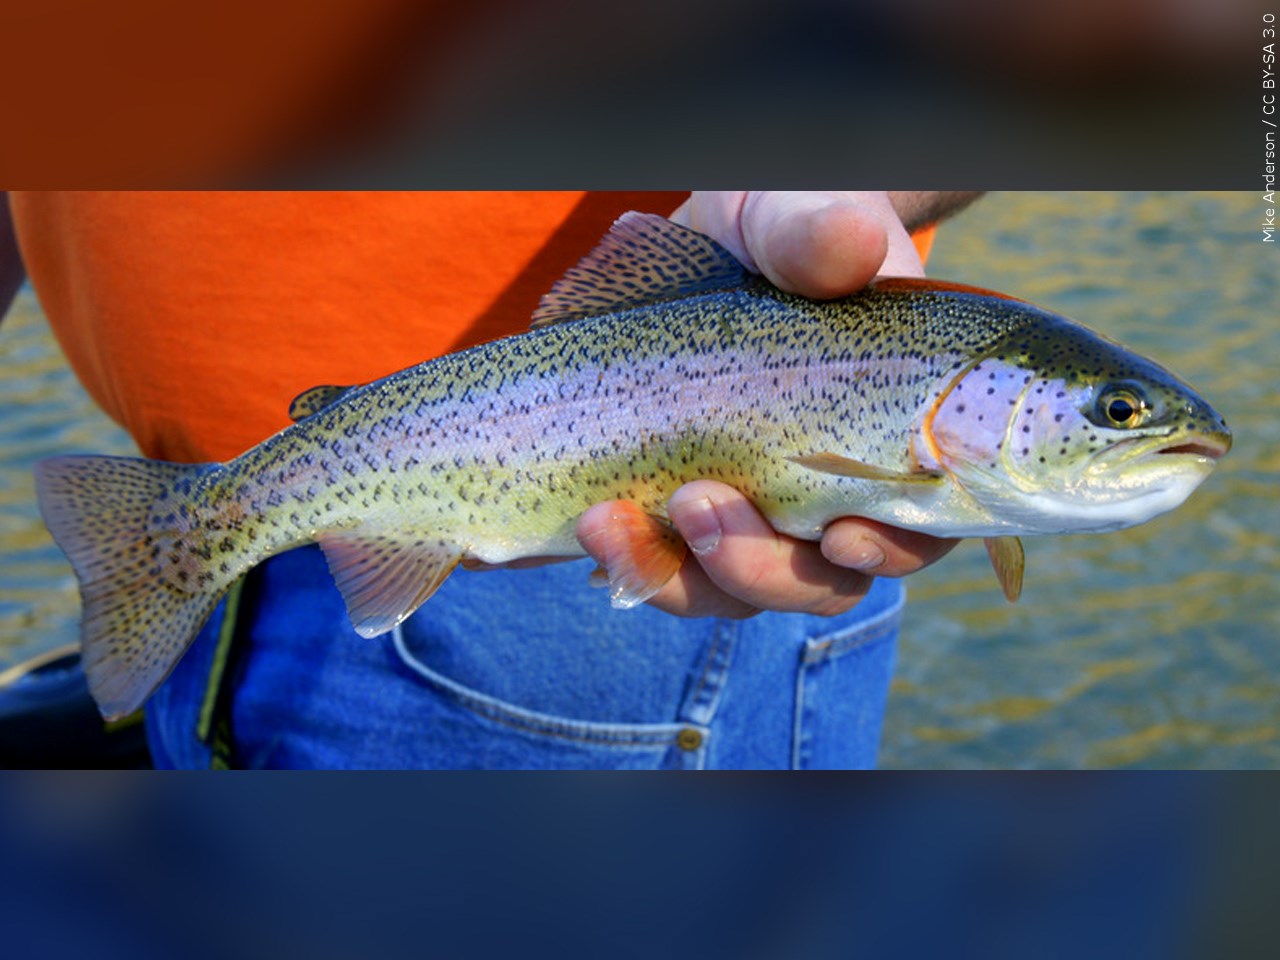 Illinois fall trout season opens in October